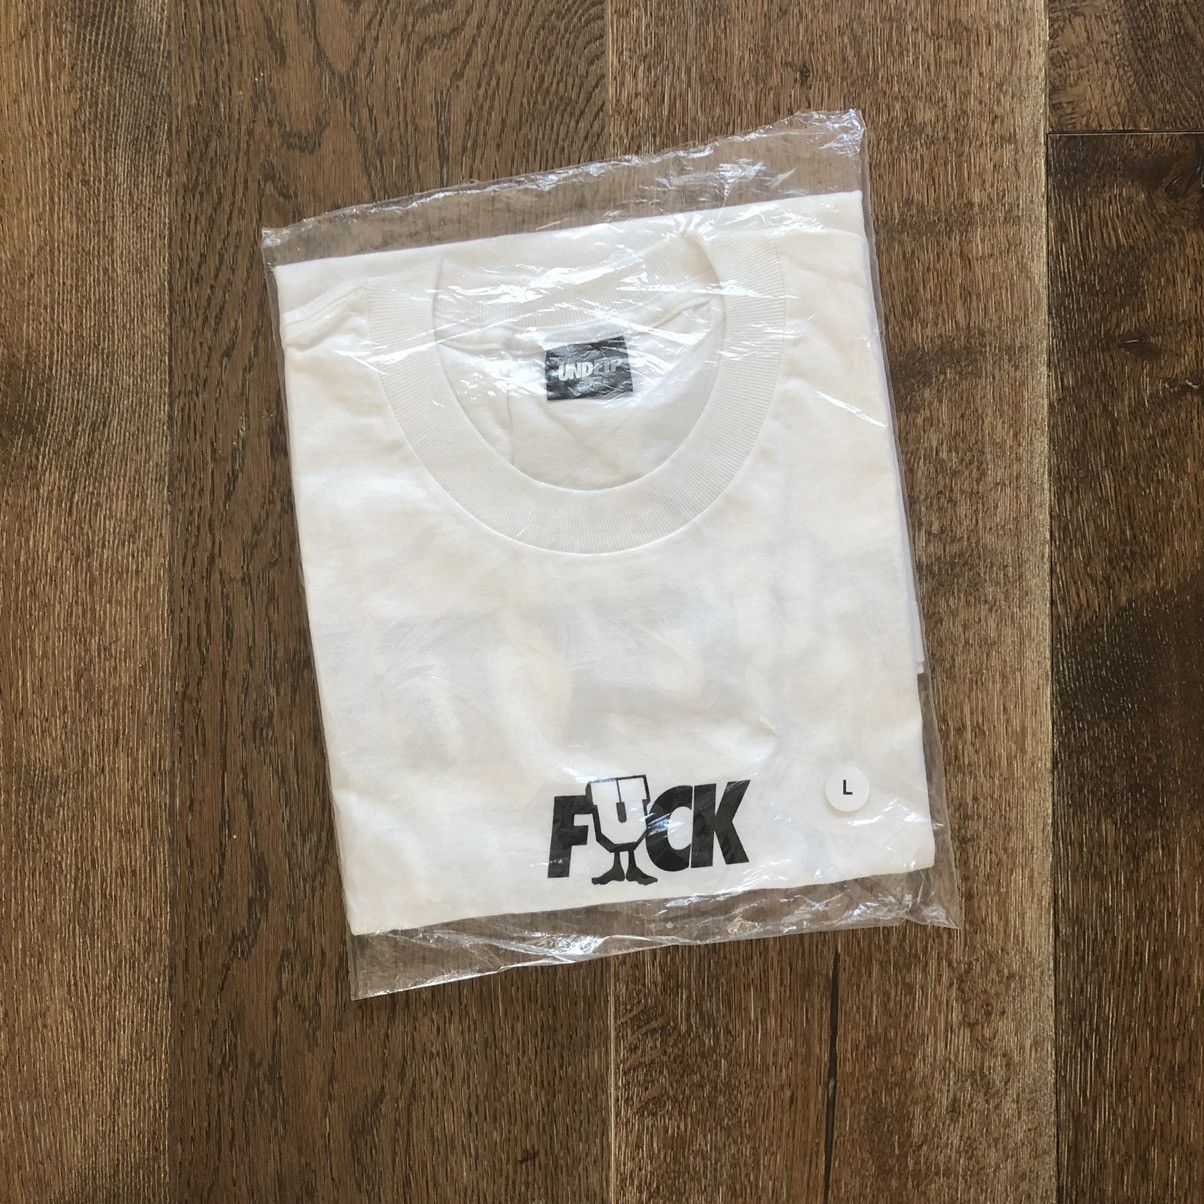 Undefeated FTP x Undefeated U-Fuck Tee | Grailed